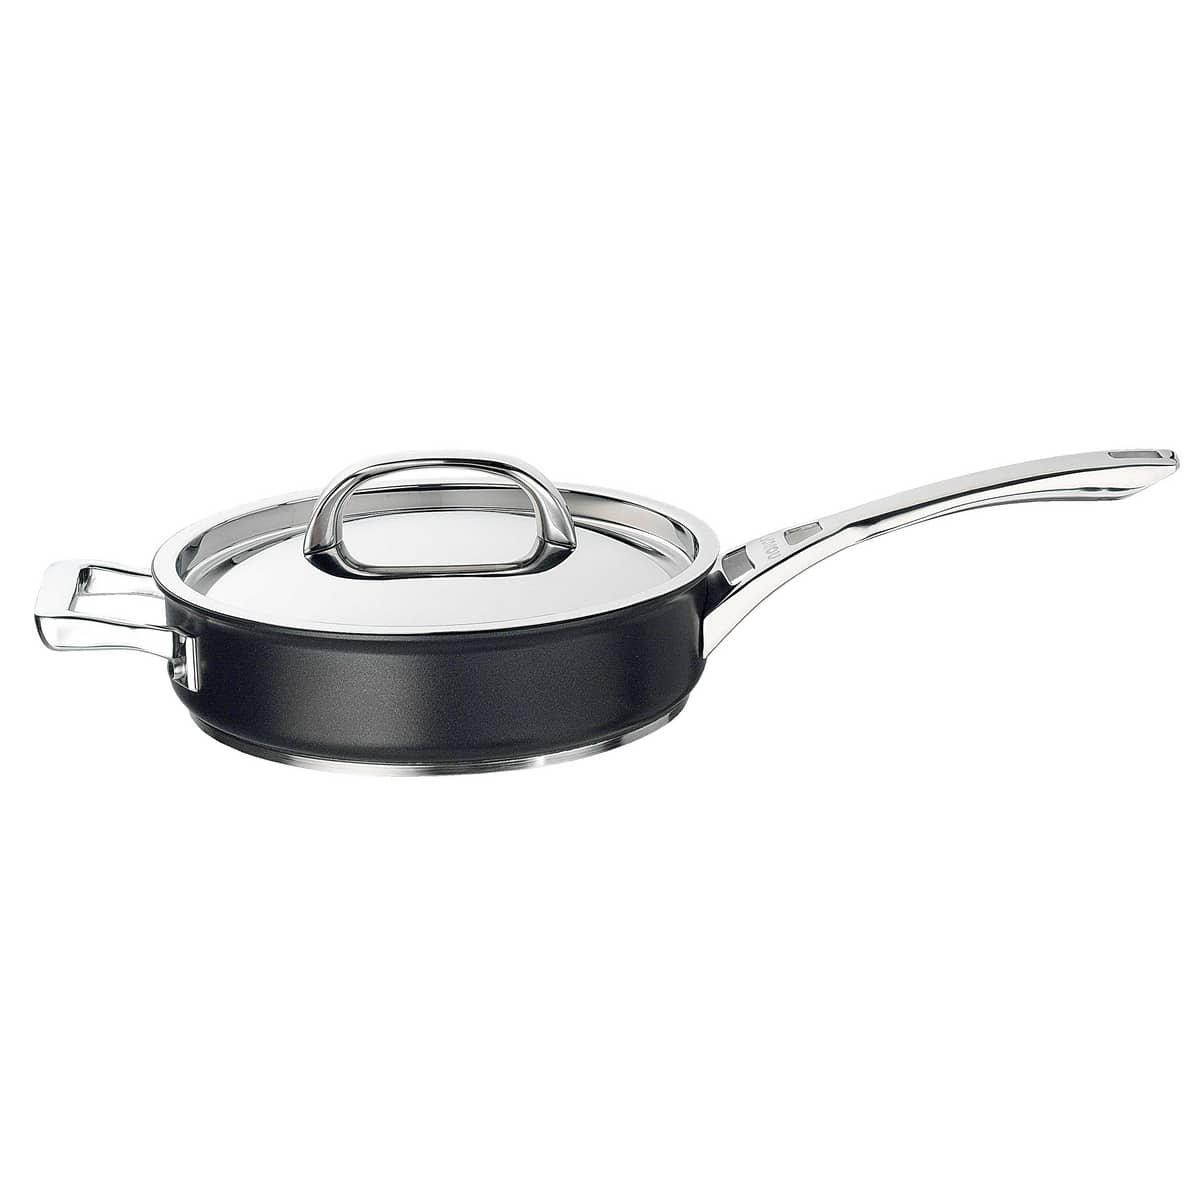 Infinite 24cm Non Stick Saute Pan With Lid Dishwasher Safe Easy Clean